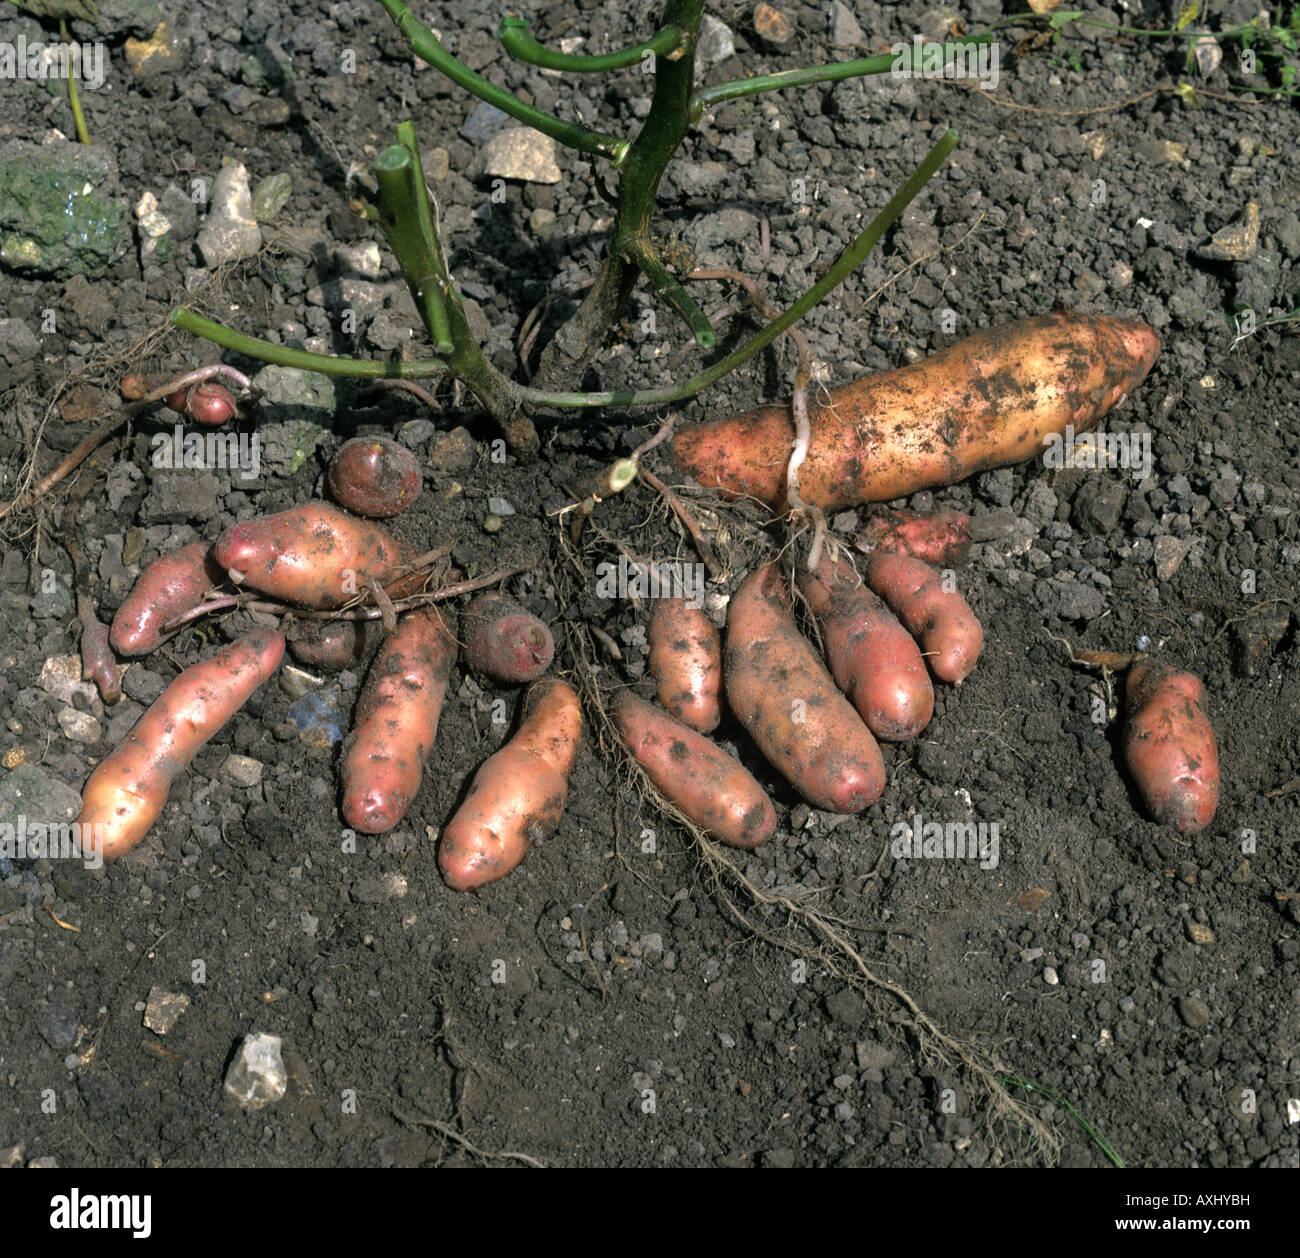 Pink fir apple potatoes exposed in the soil at harvest Stock Photo